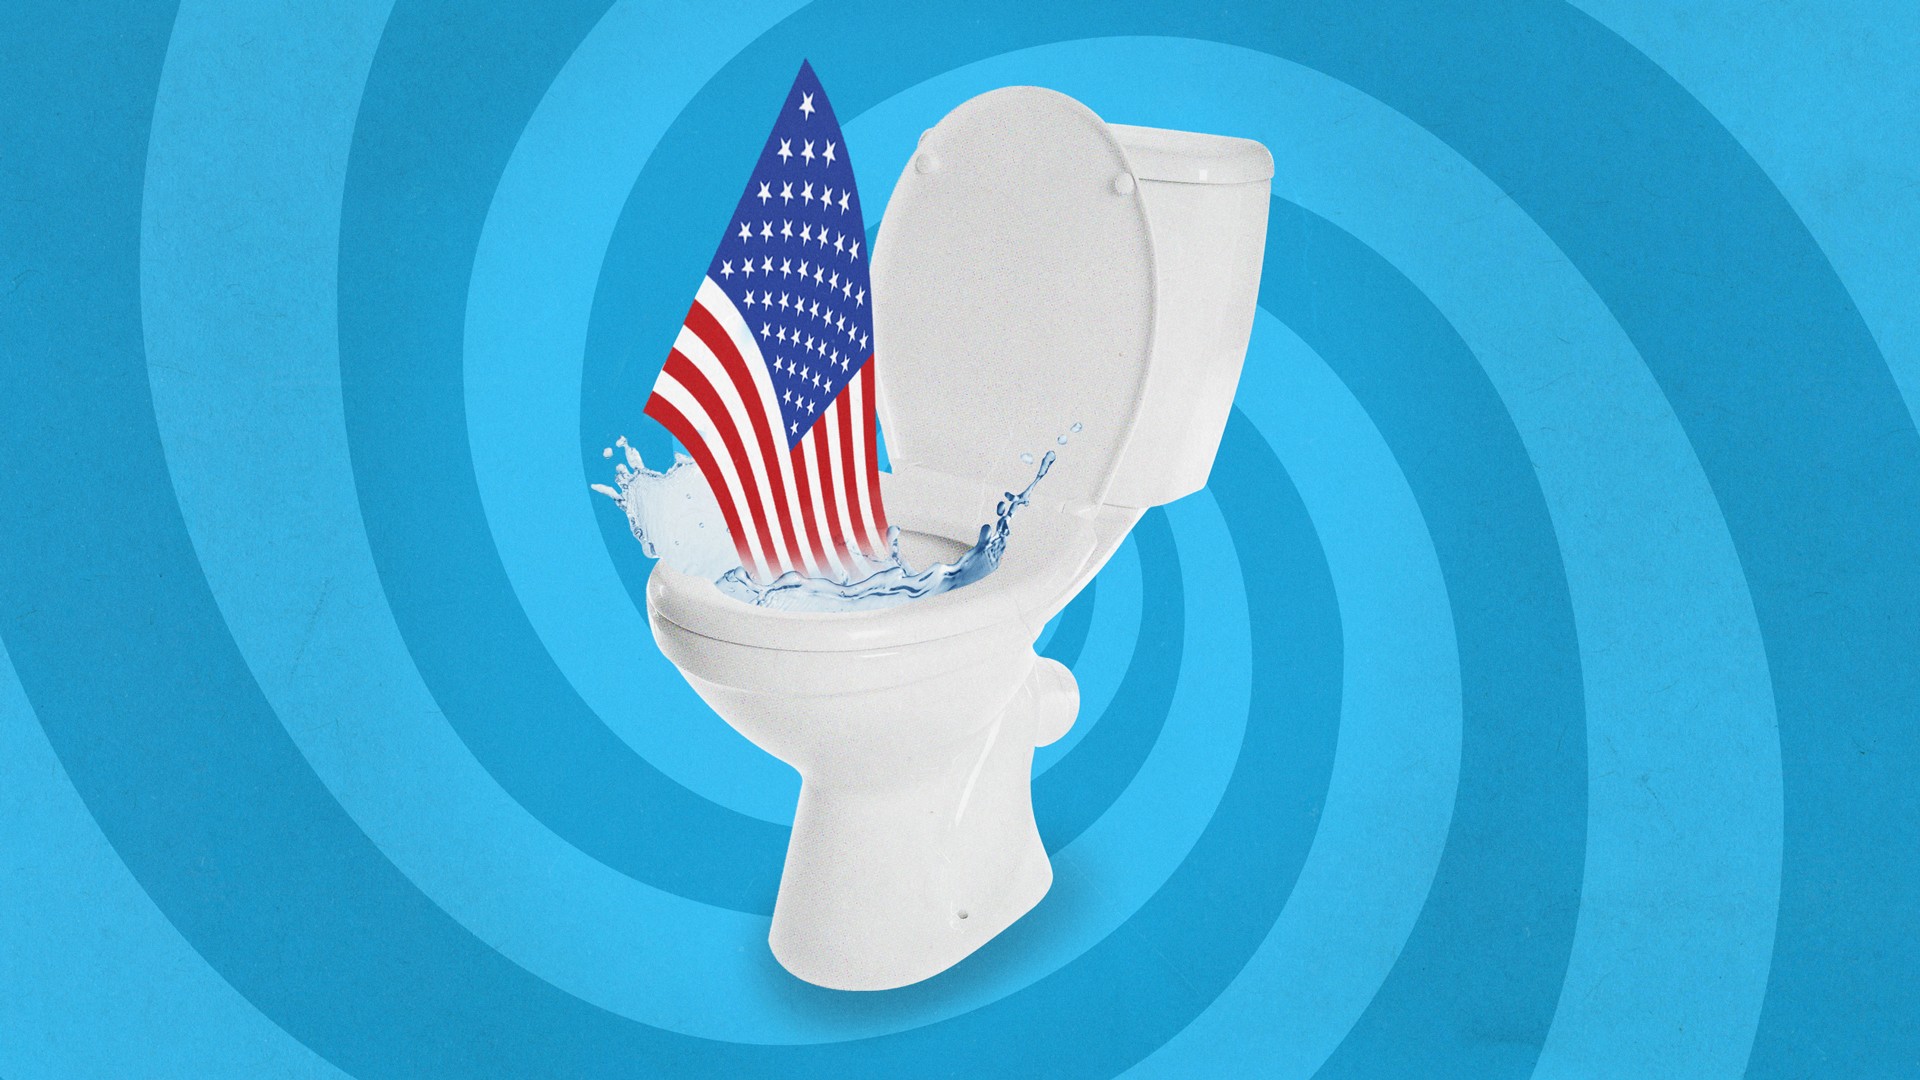 https://video-images.vice.com/articles/5e223082617414009514a15a/lede/1579299473494-Trumps-bizarre-war-on-lightbulbs-and-Toilets-Actually-Explains-Everything-About-America_Blue_HF.jpeg?crop=1xw:0.7111111111111111xh;center,center